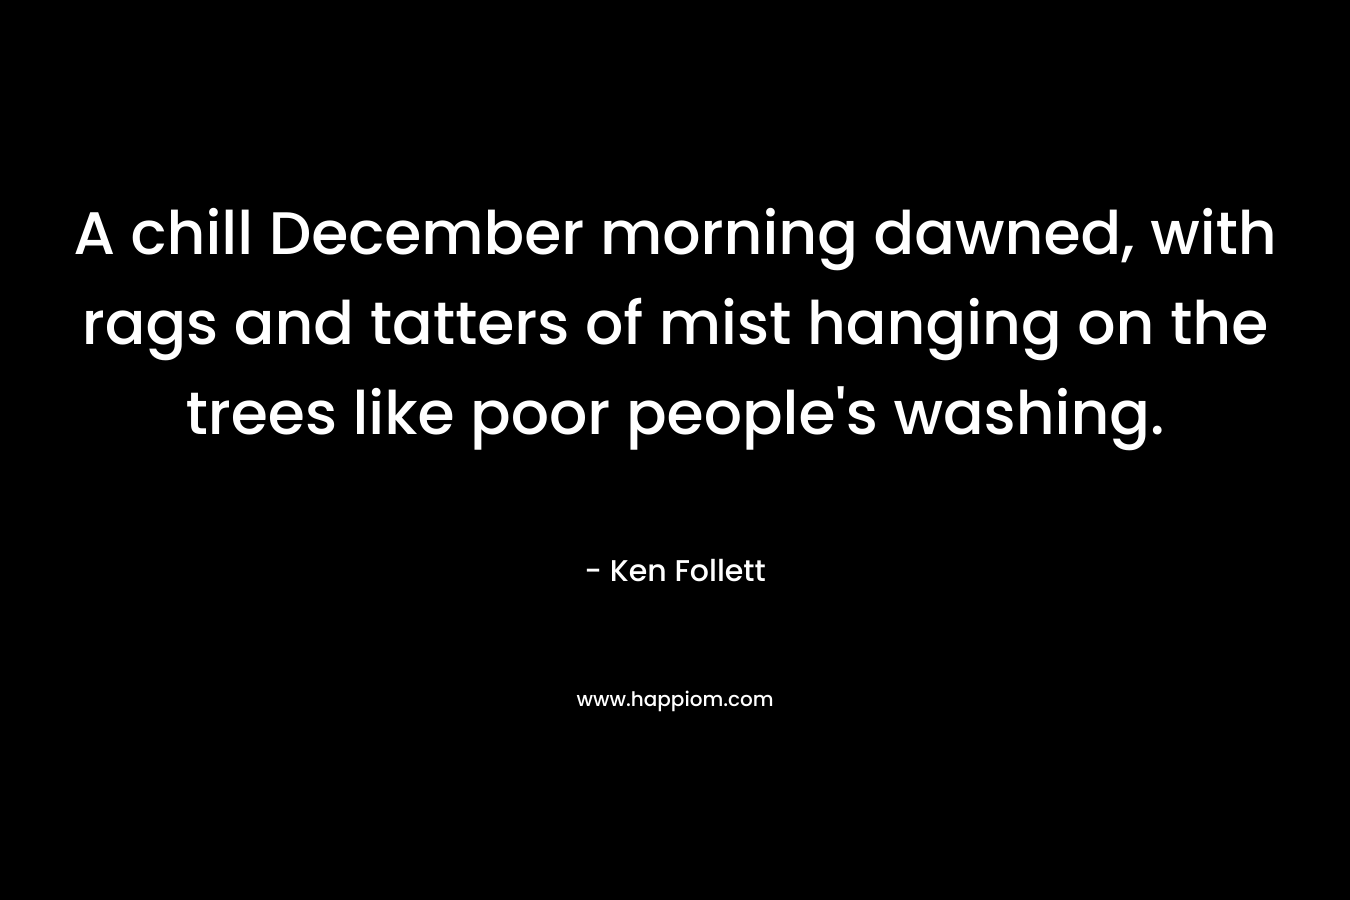 A chill December morning dawned, with rags and tatters of mist hanging on the trees like poor people’s washing. – Ken Follett